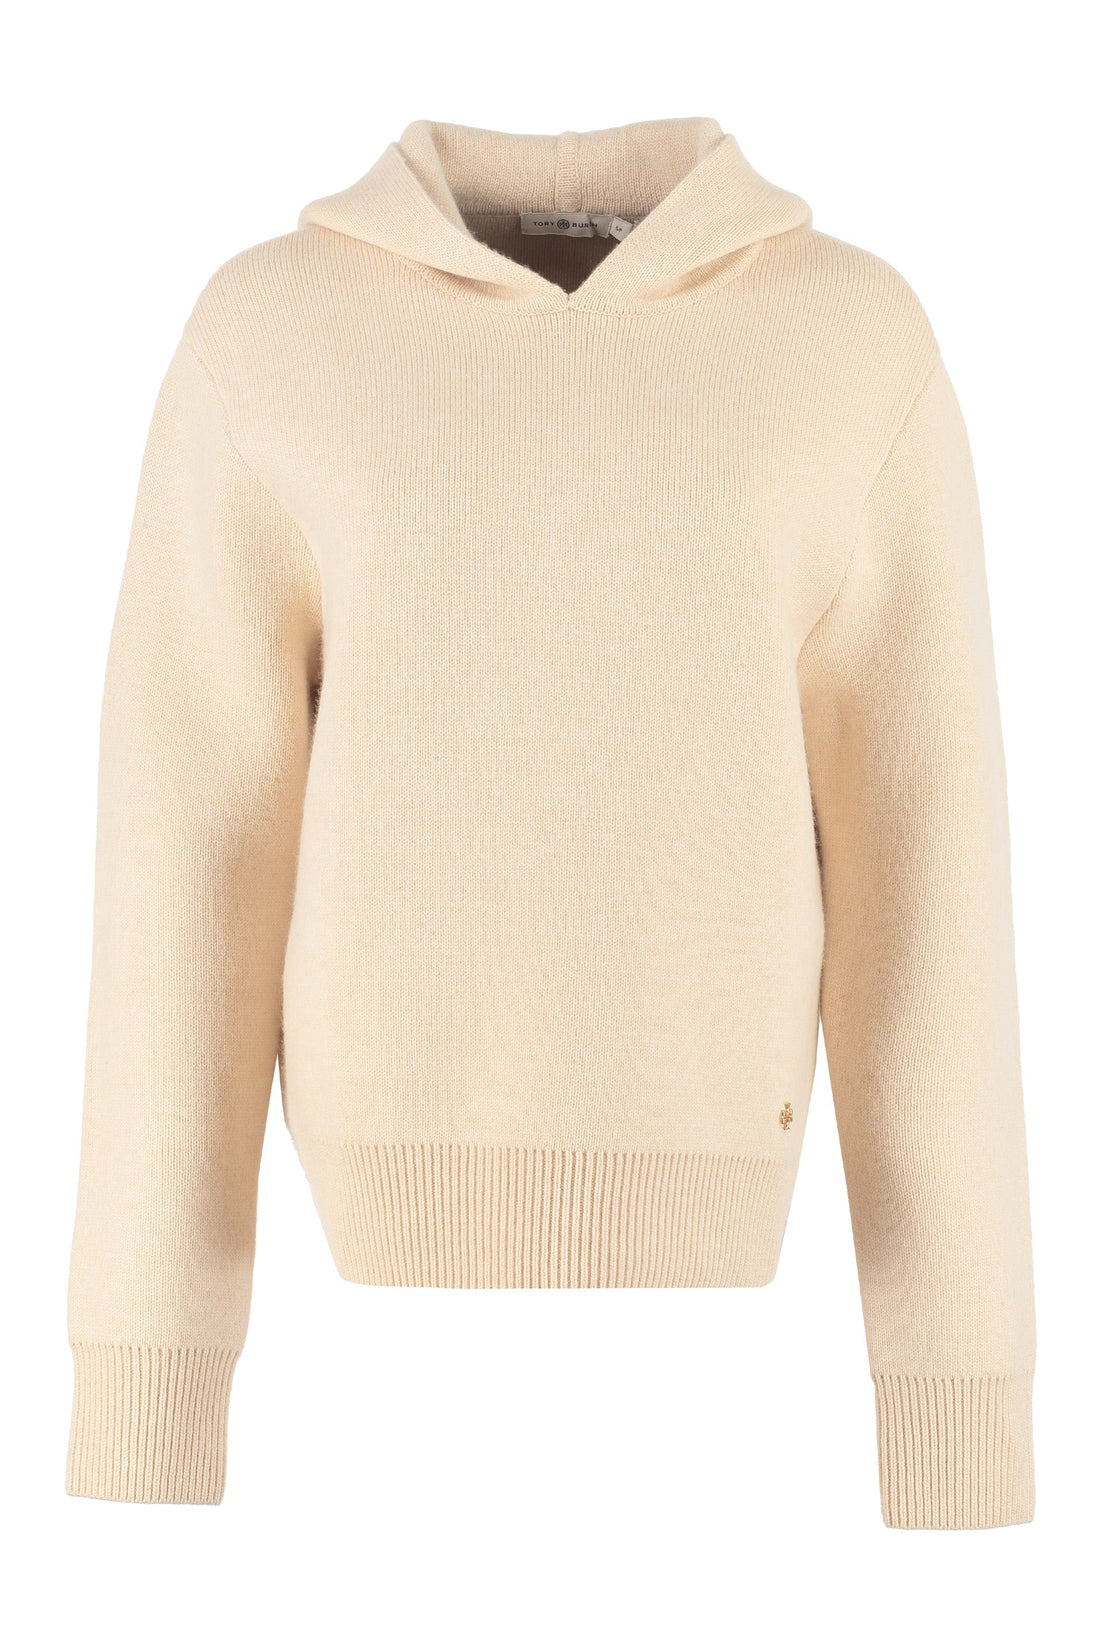 Tory Burch-OUTLET-SALE-Wool and cashmere pullover-ARCHIVIST